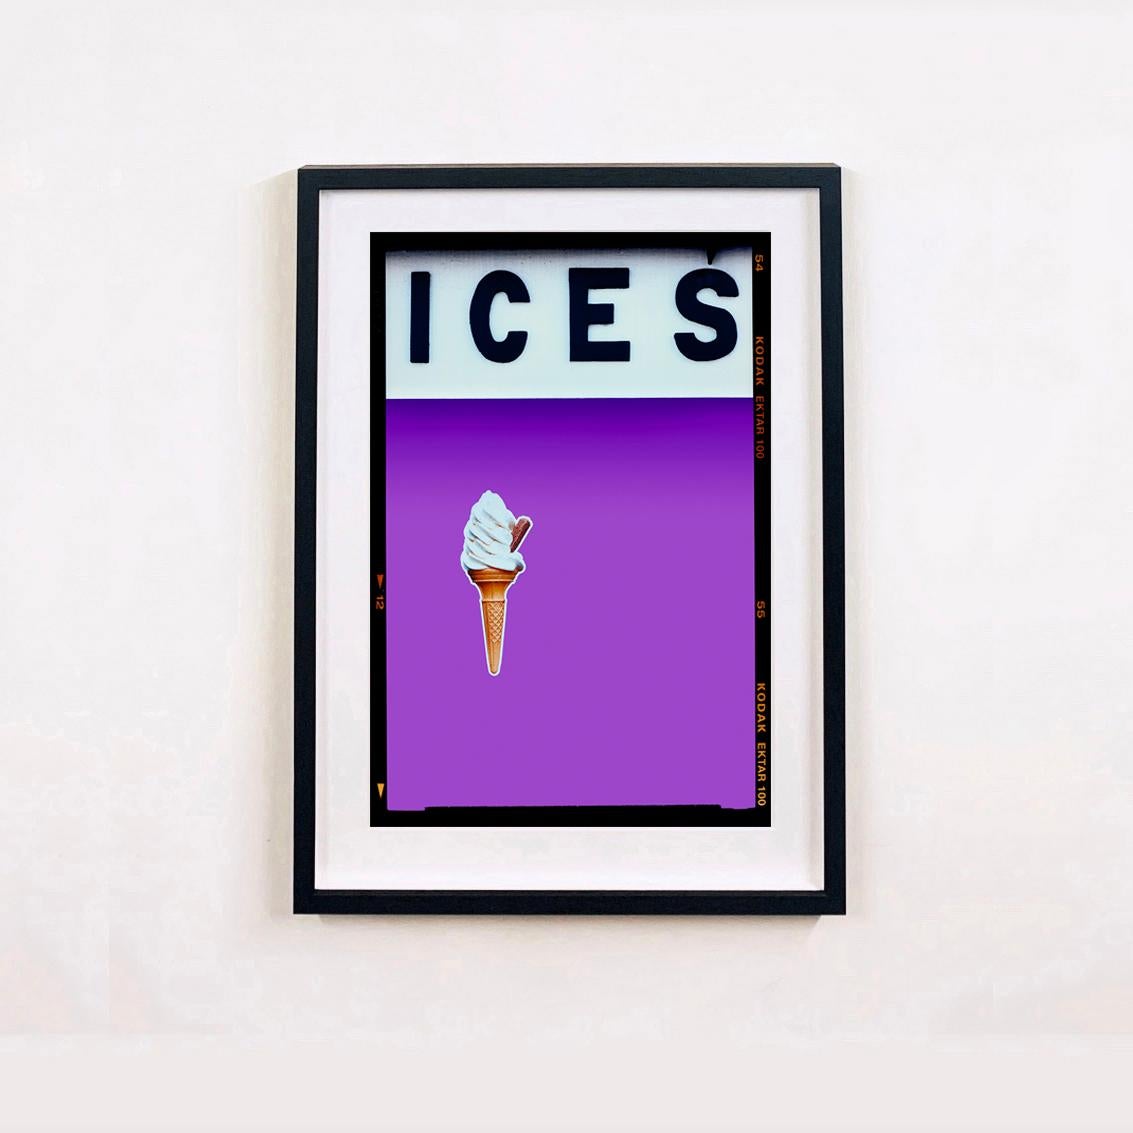 ICES - Four Framed Artworks - Pop Art Color Photography - Print by Richard Heeps